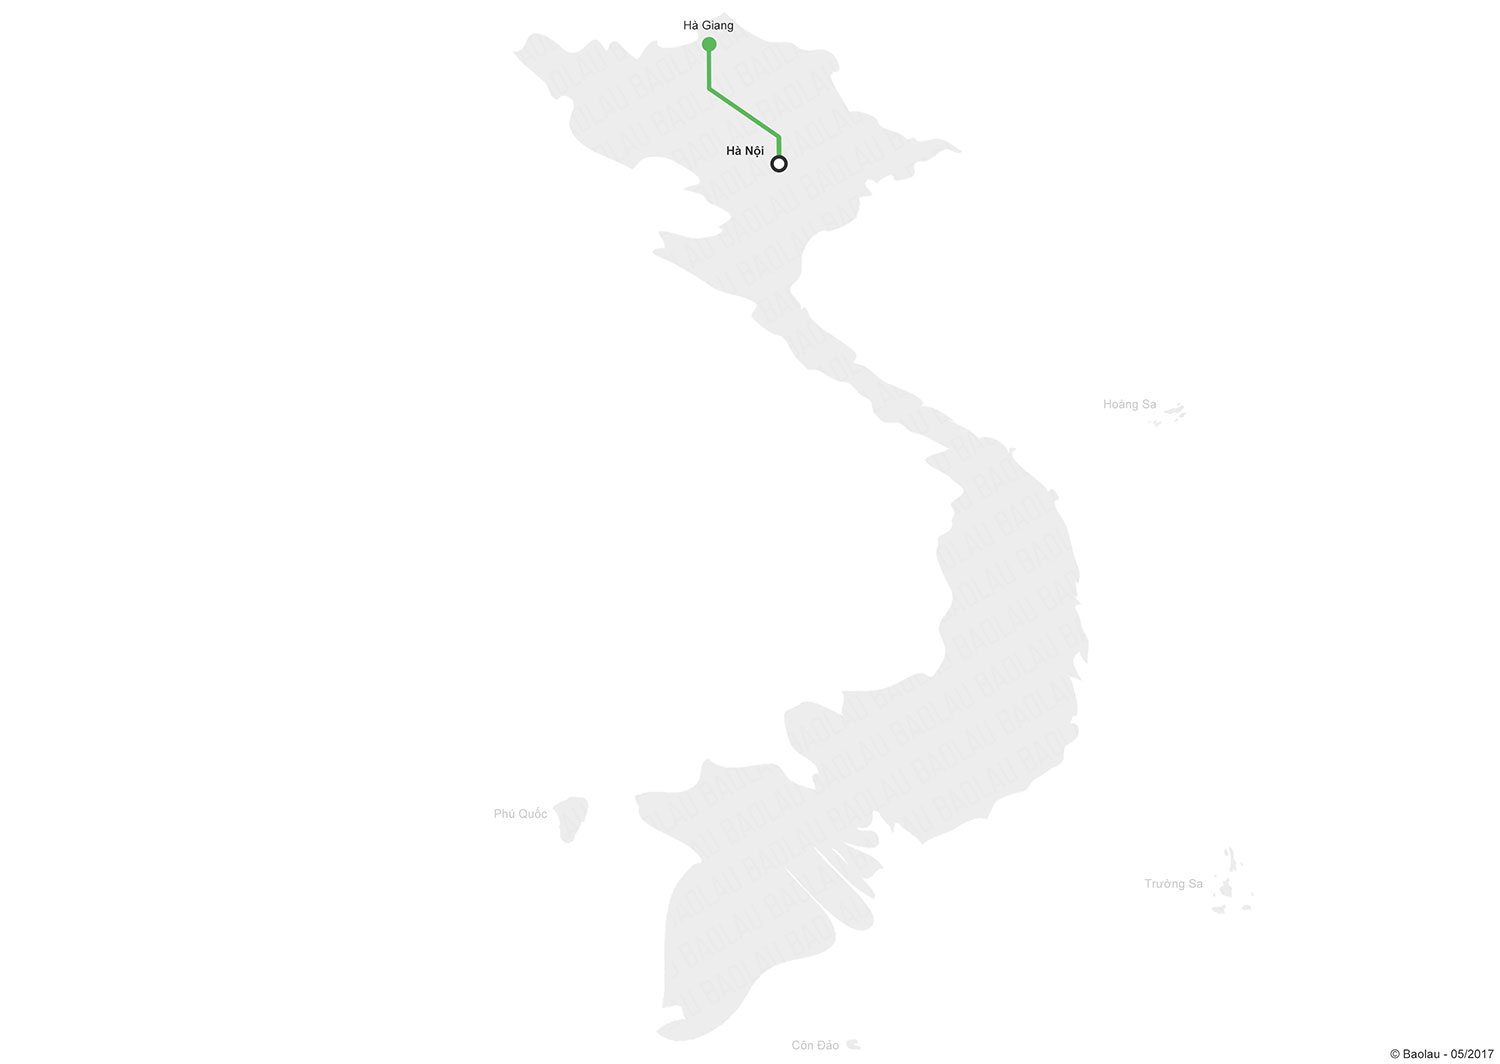 Map of bus route from Hanoi to Ha Giang